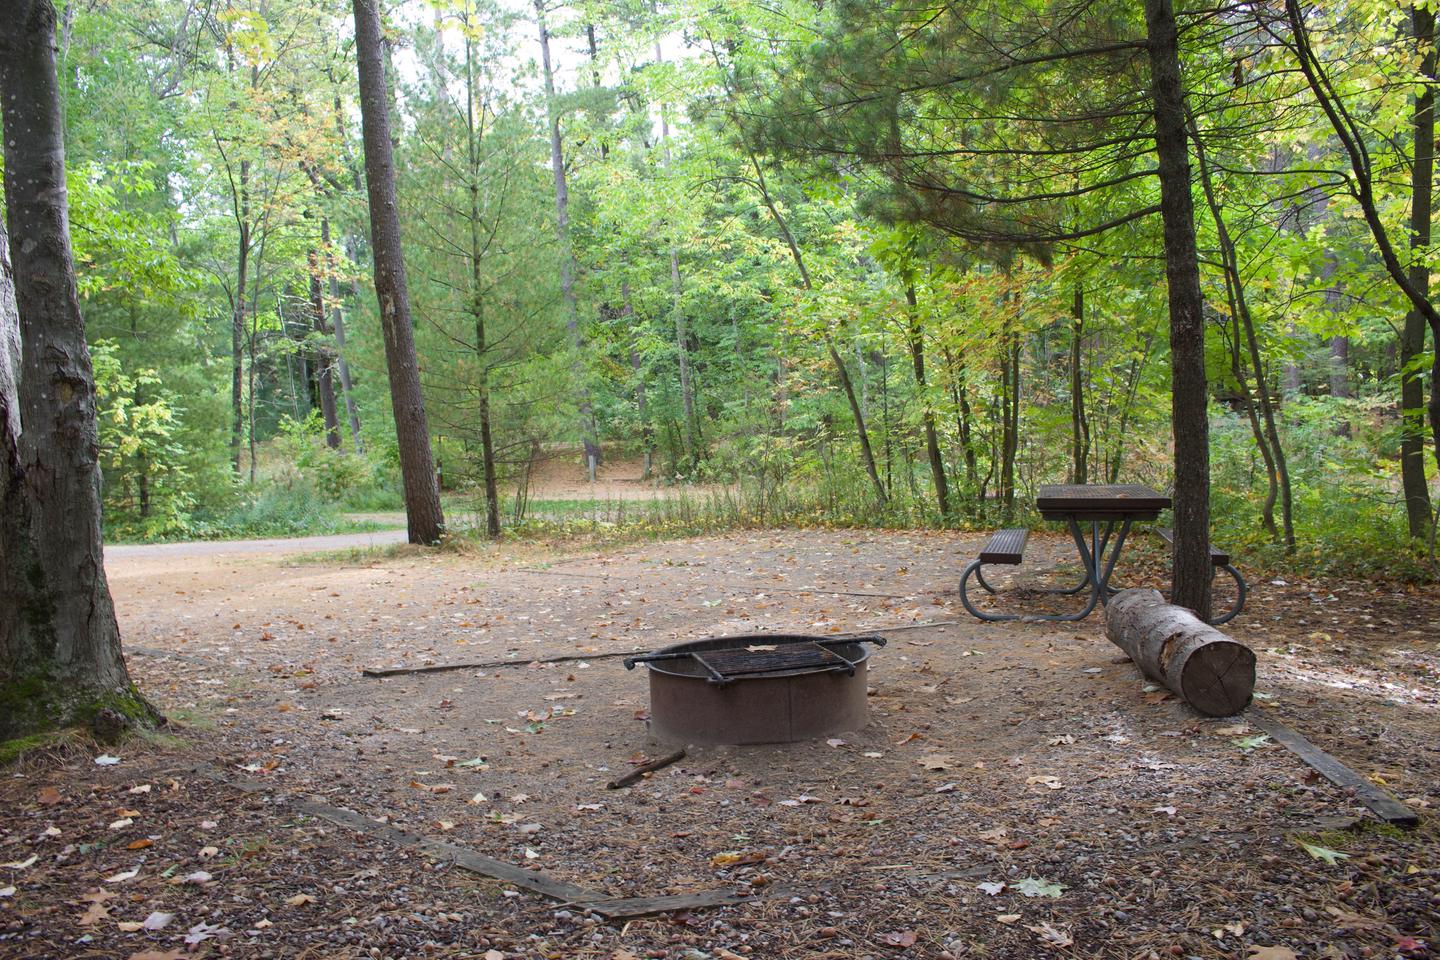 Campsite #14, view from the site toward the road